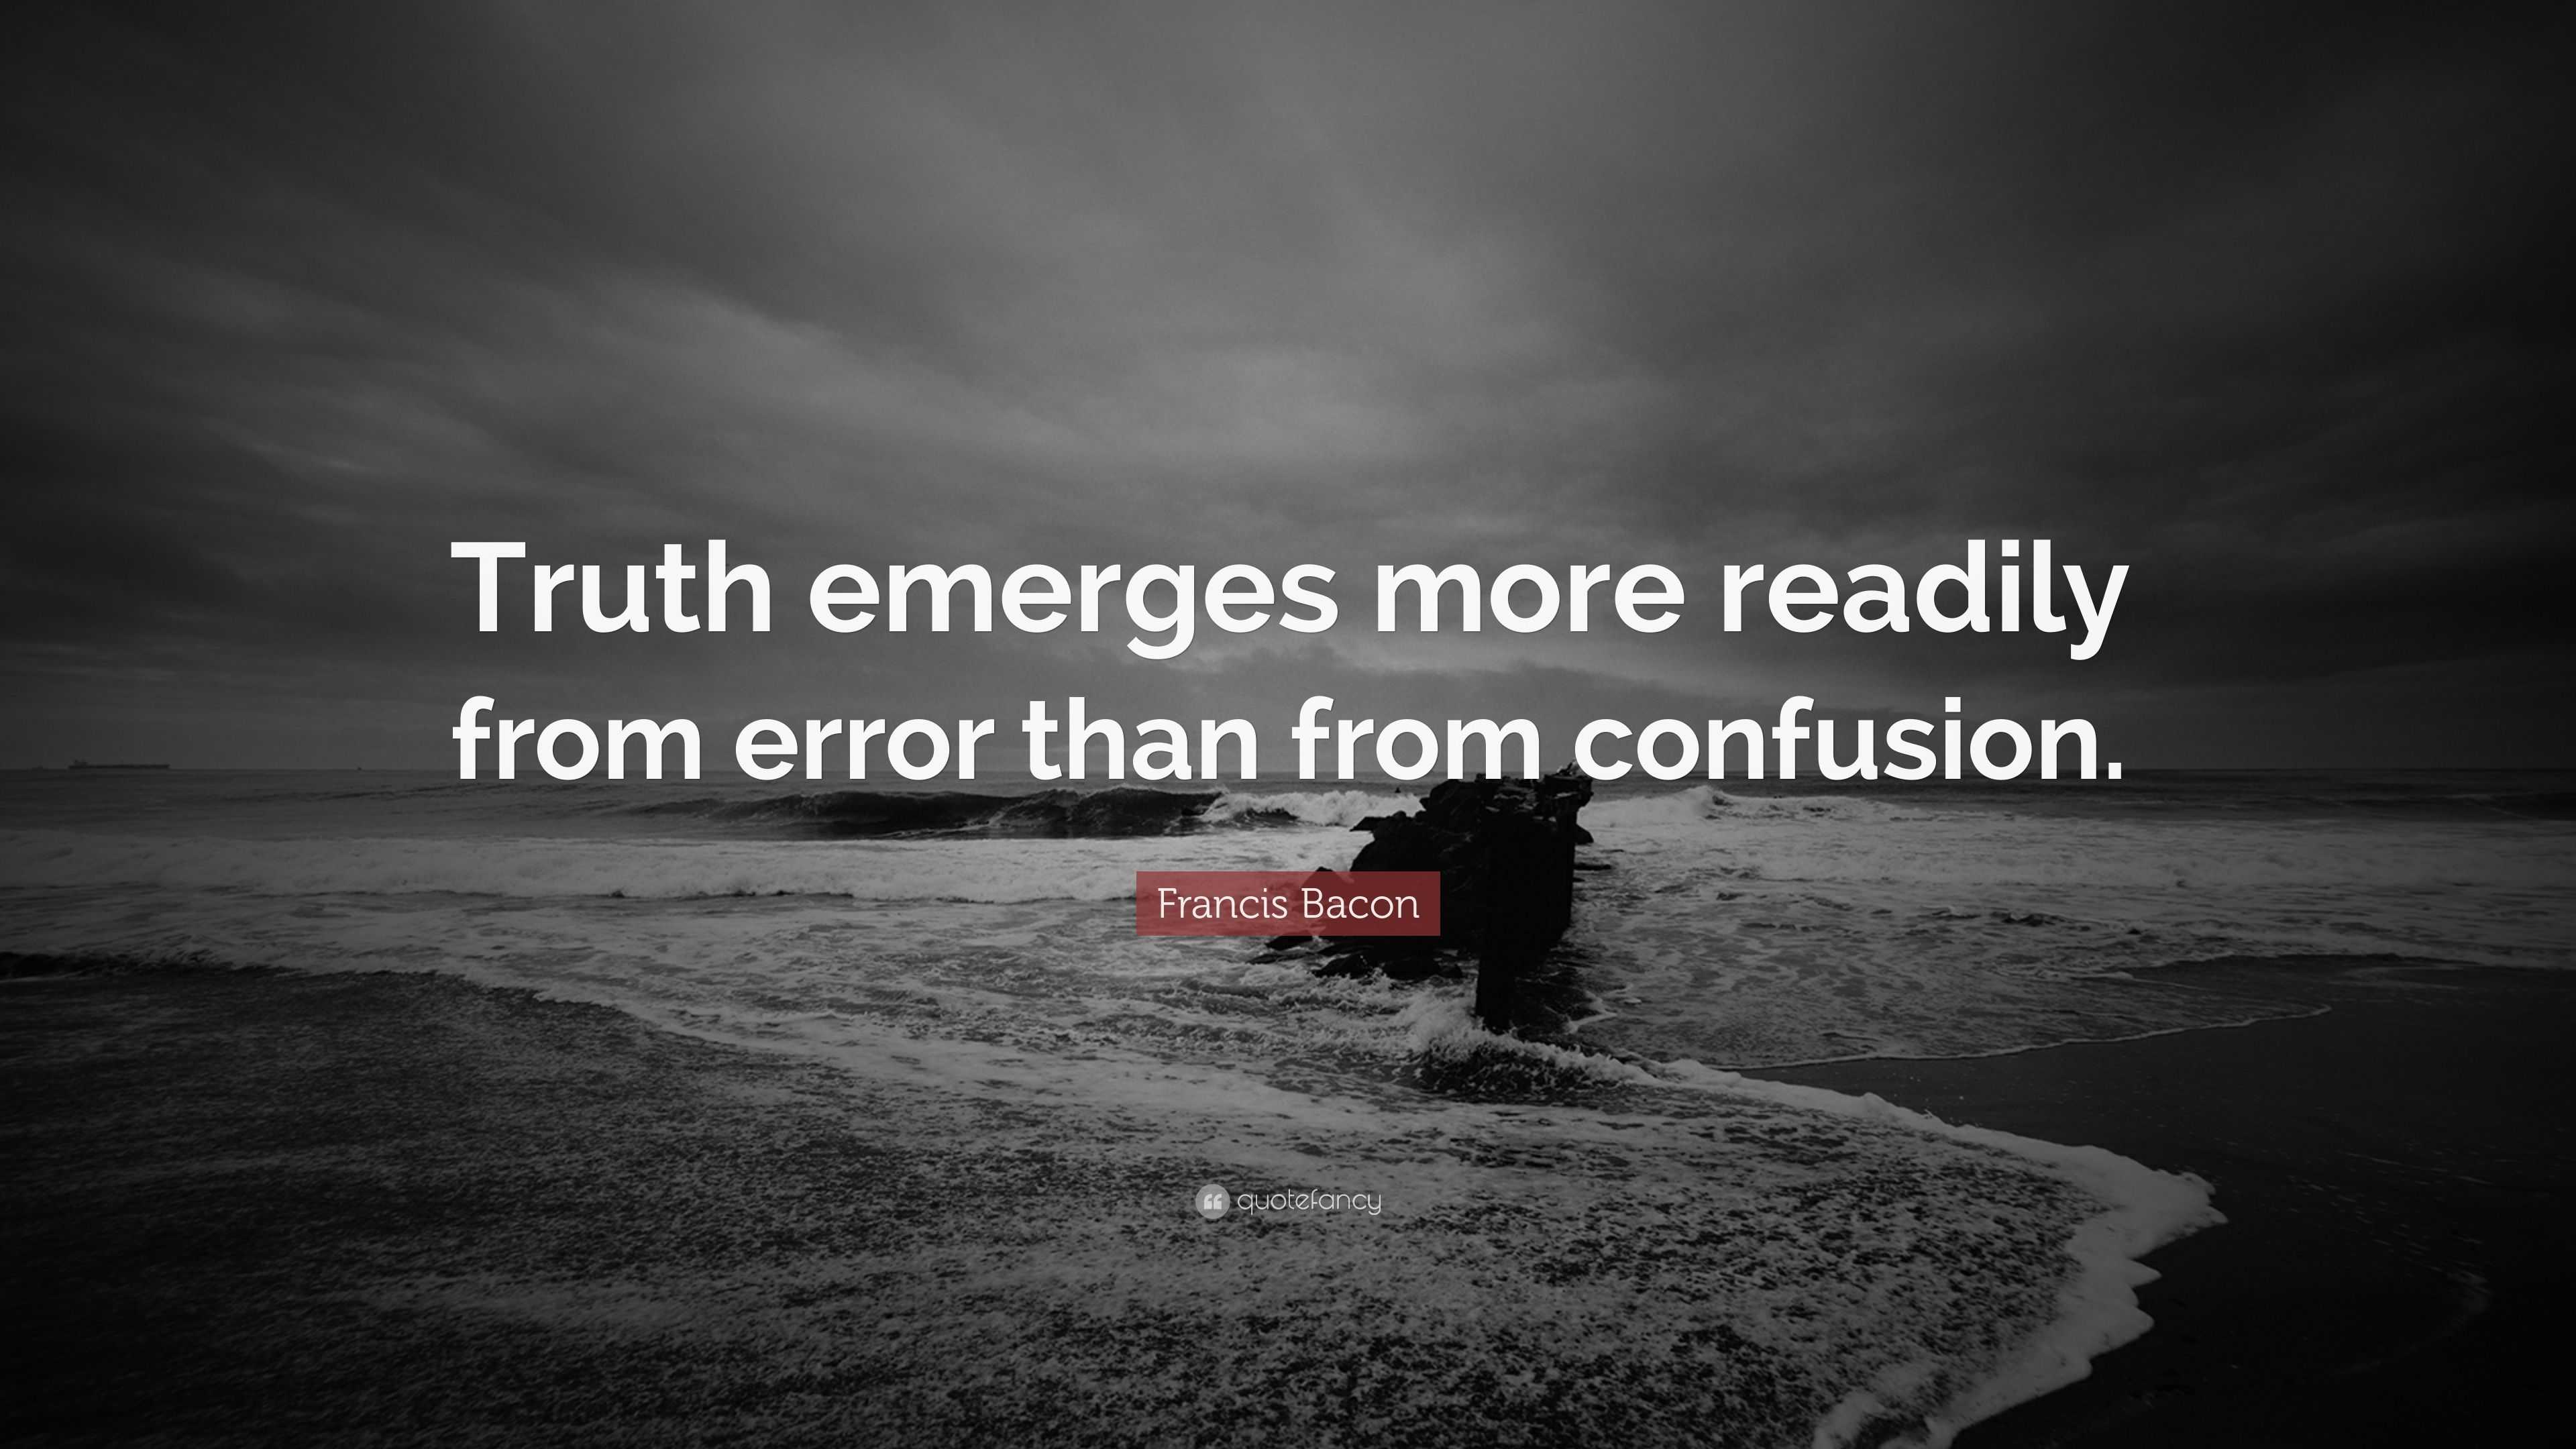 Francis Bacon Quote “truth Emerges More Readily From Error Than From Confusion ”